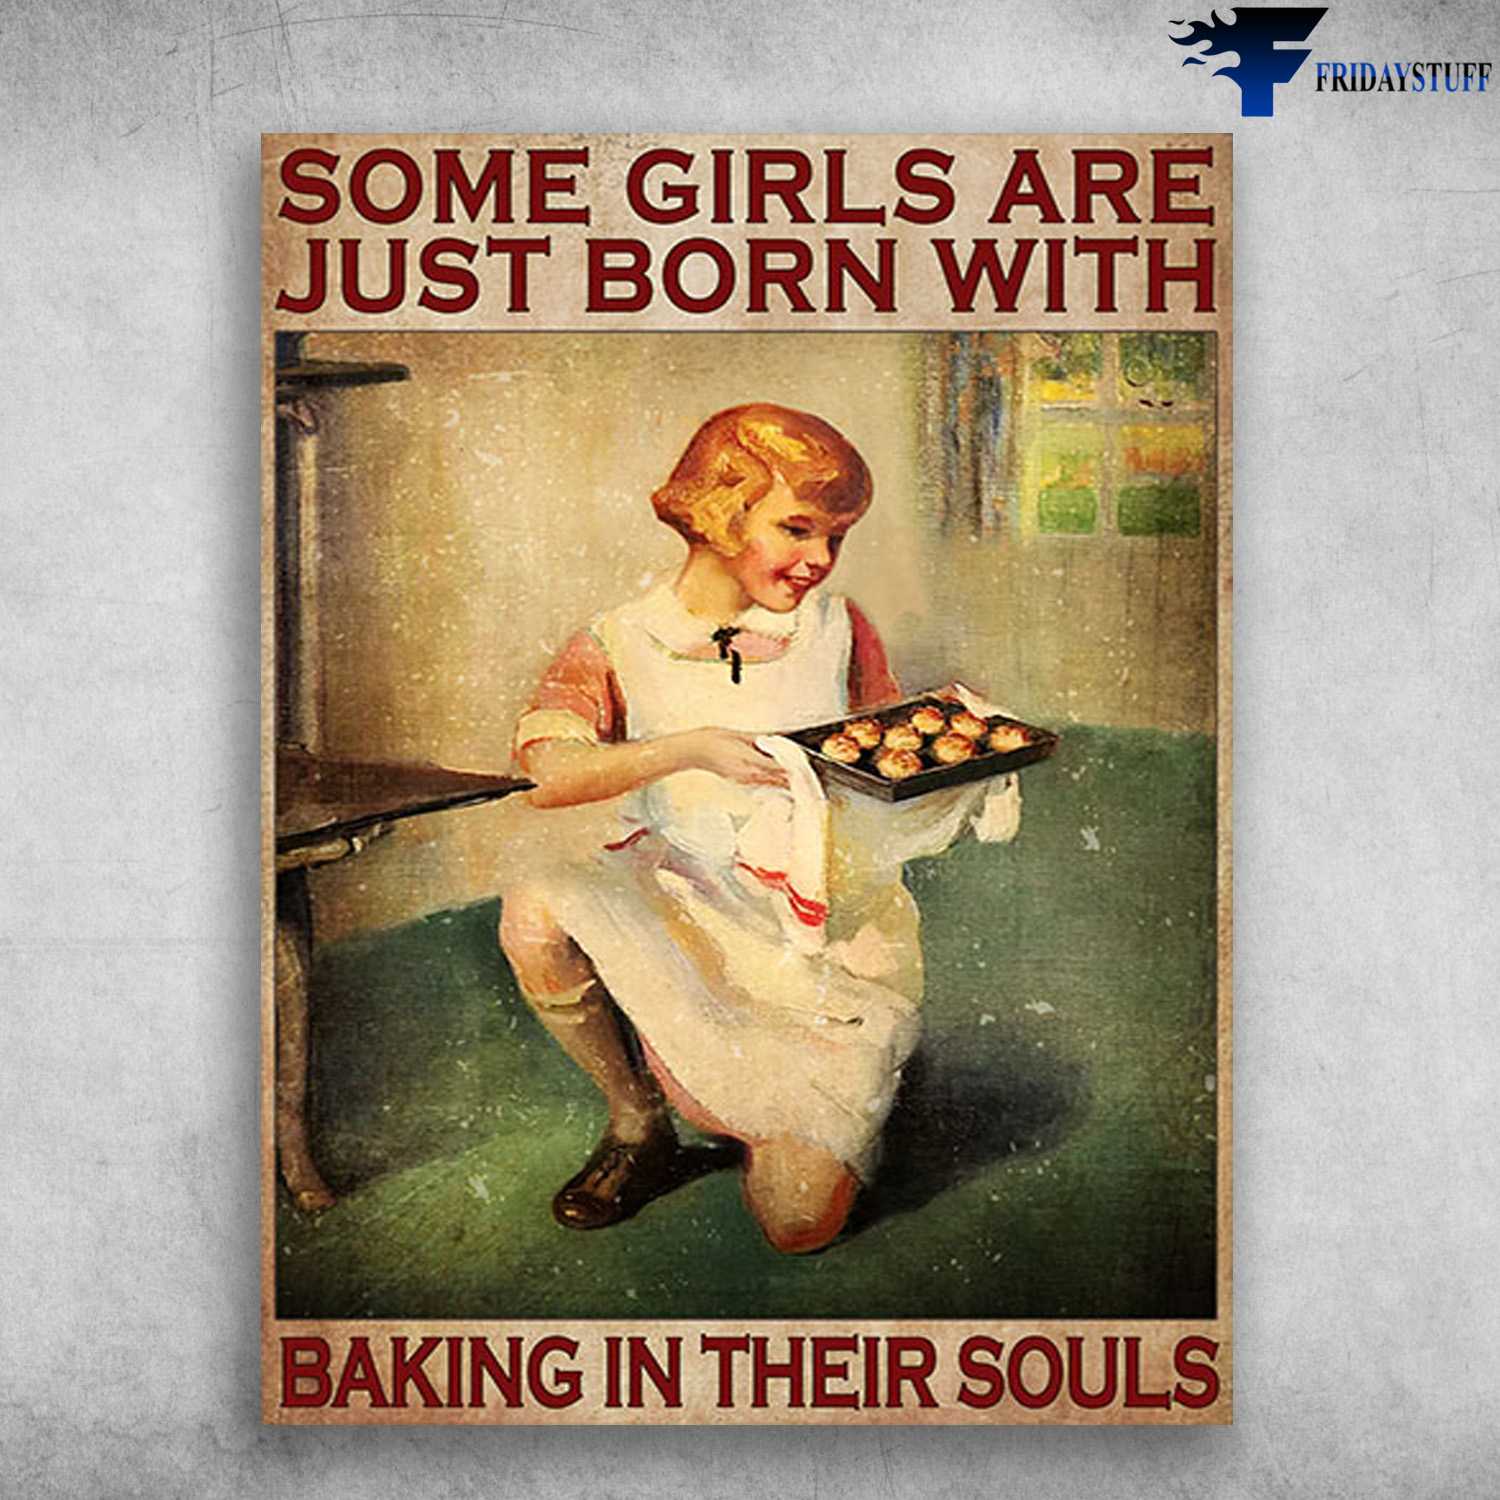 Baking Poster, Girl Loves Baking - Some Girls Are Just Born, With Baking In Their Souls